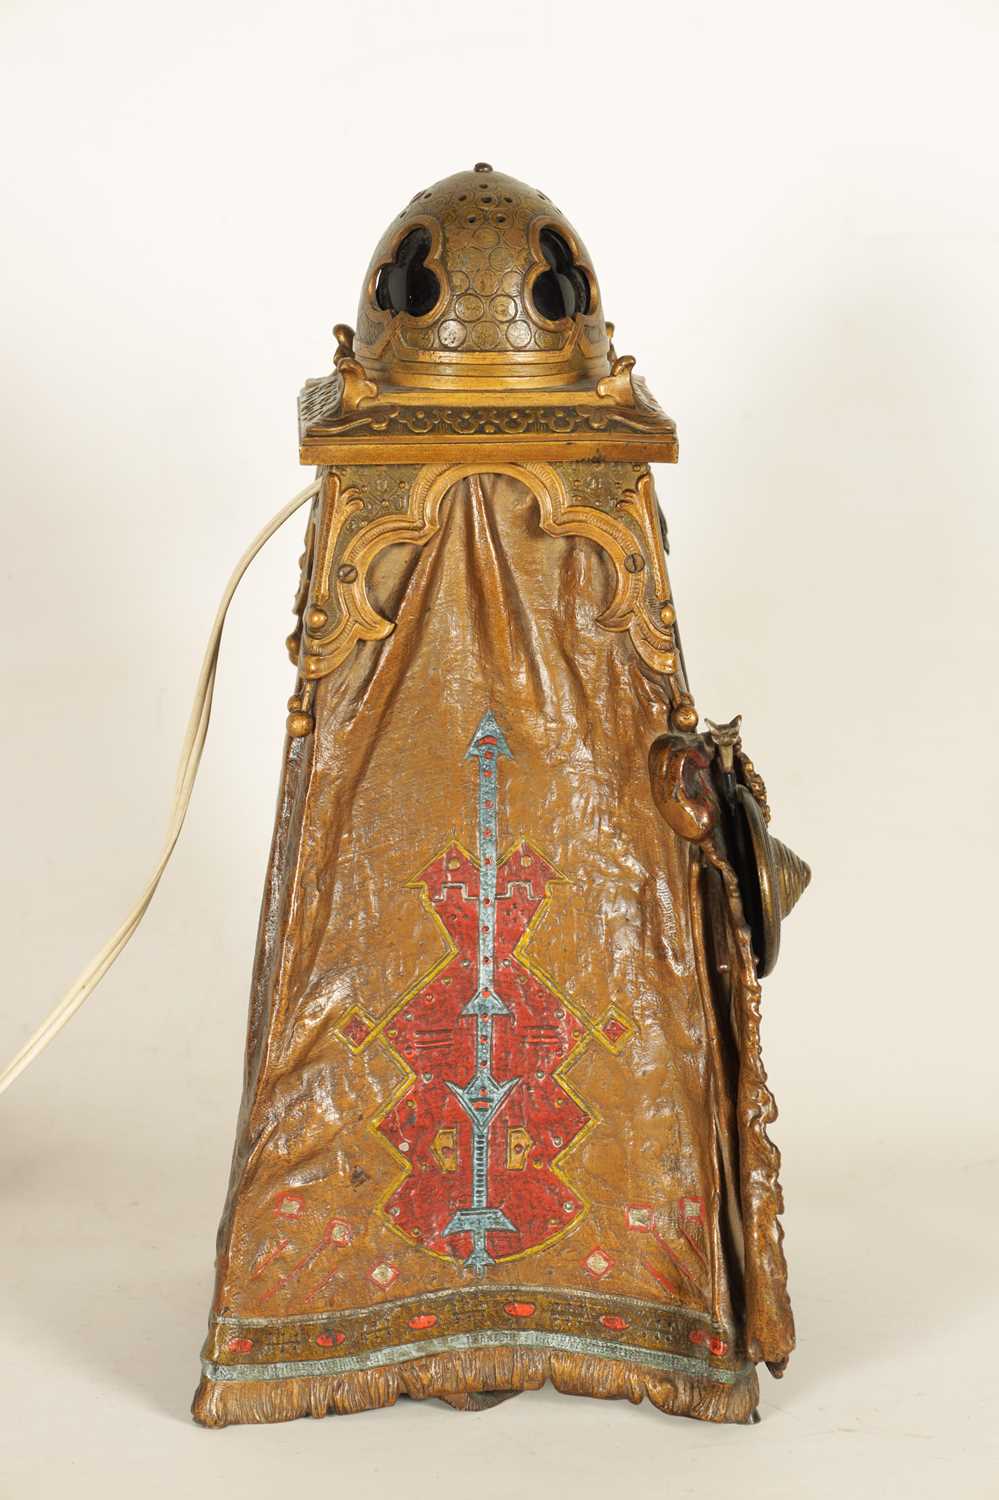 FRANZ BERGMAN. AN EARLY 20TH CENTURY AUSTRIAN COLD-PAINTED BRONZE ORIENTALIST TABLE LAMP - Image 8 of 18